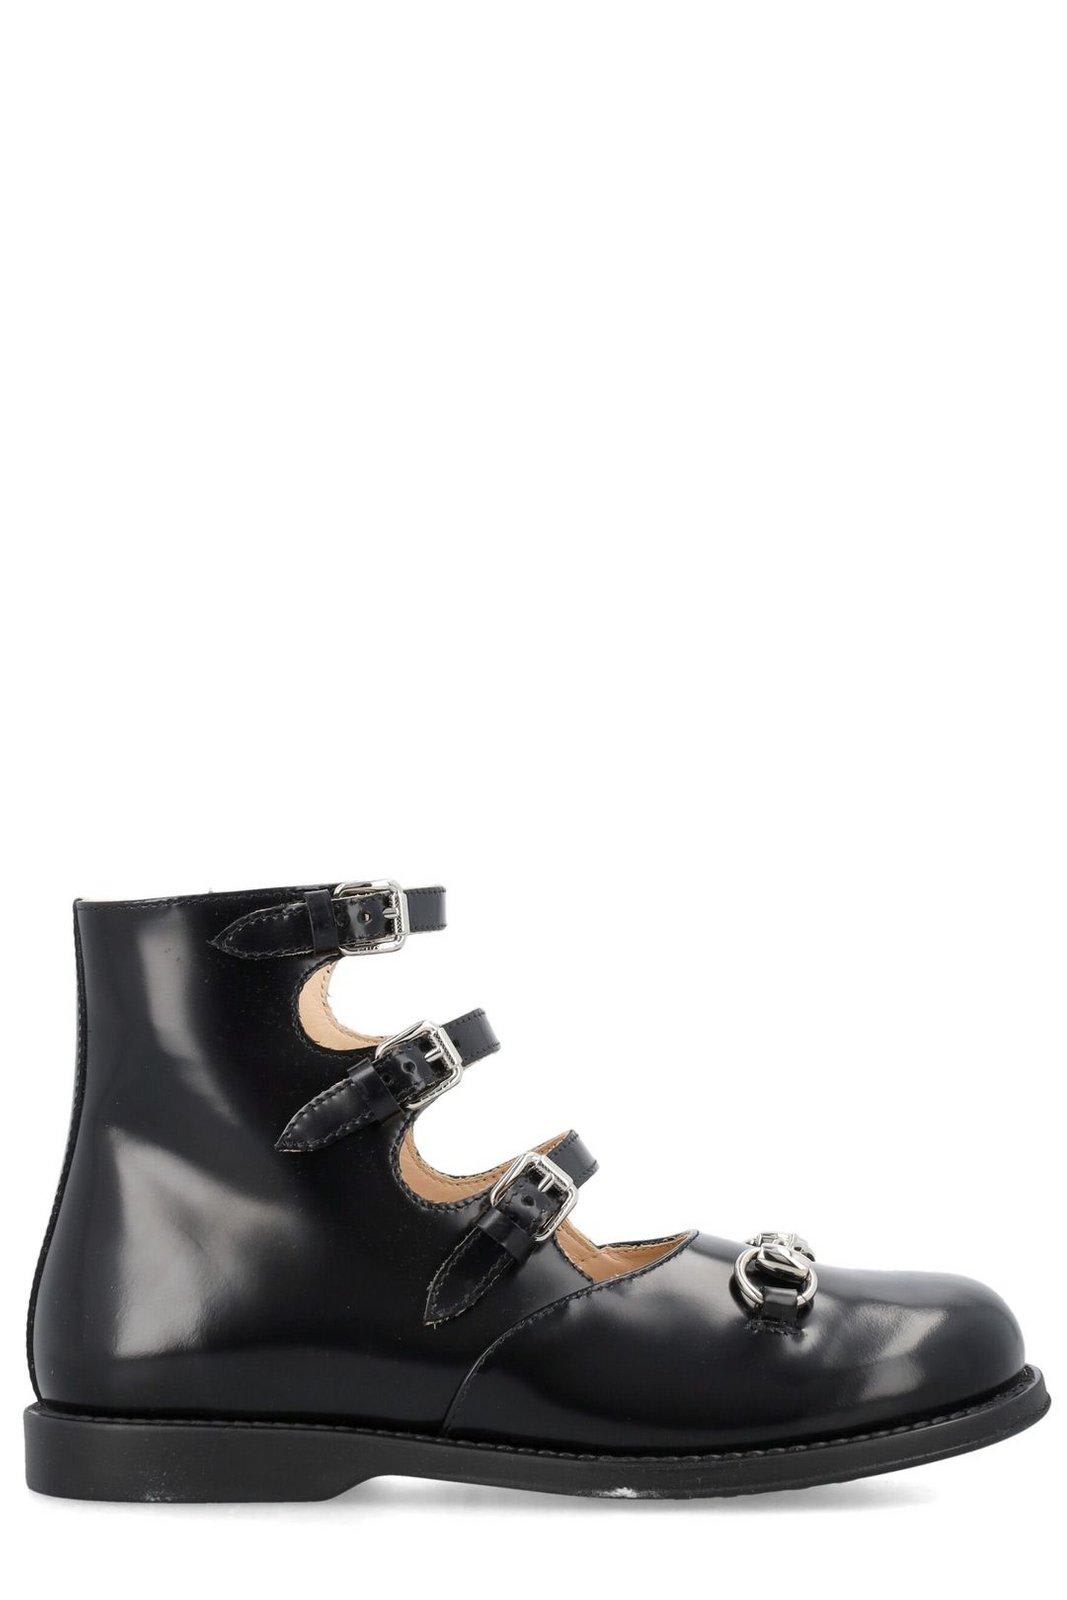 GUCCI HORSEBIT ROUND TOE ANKLE BOOTS